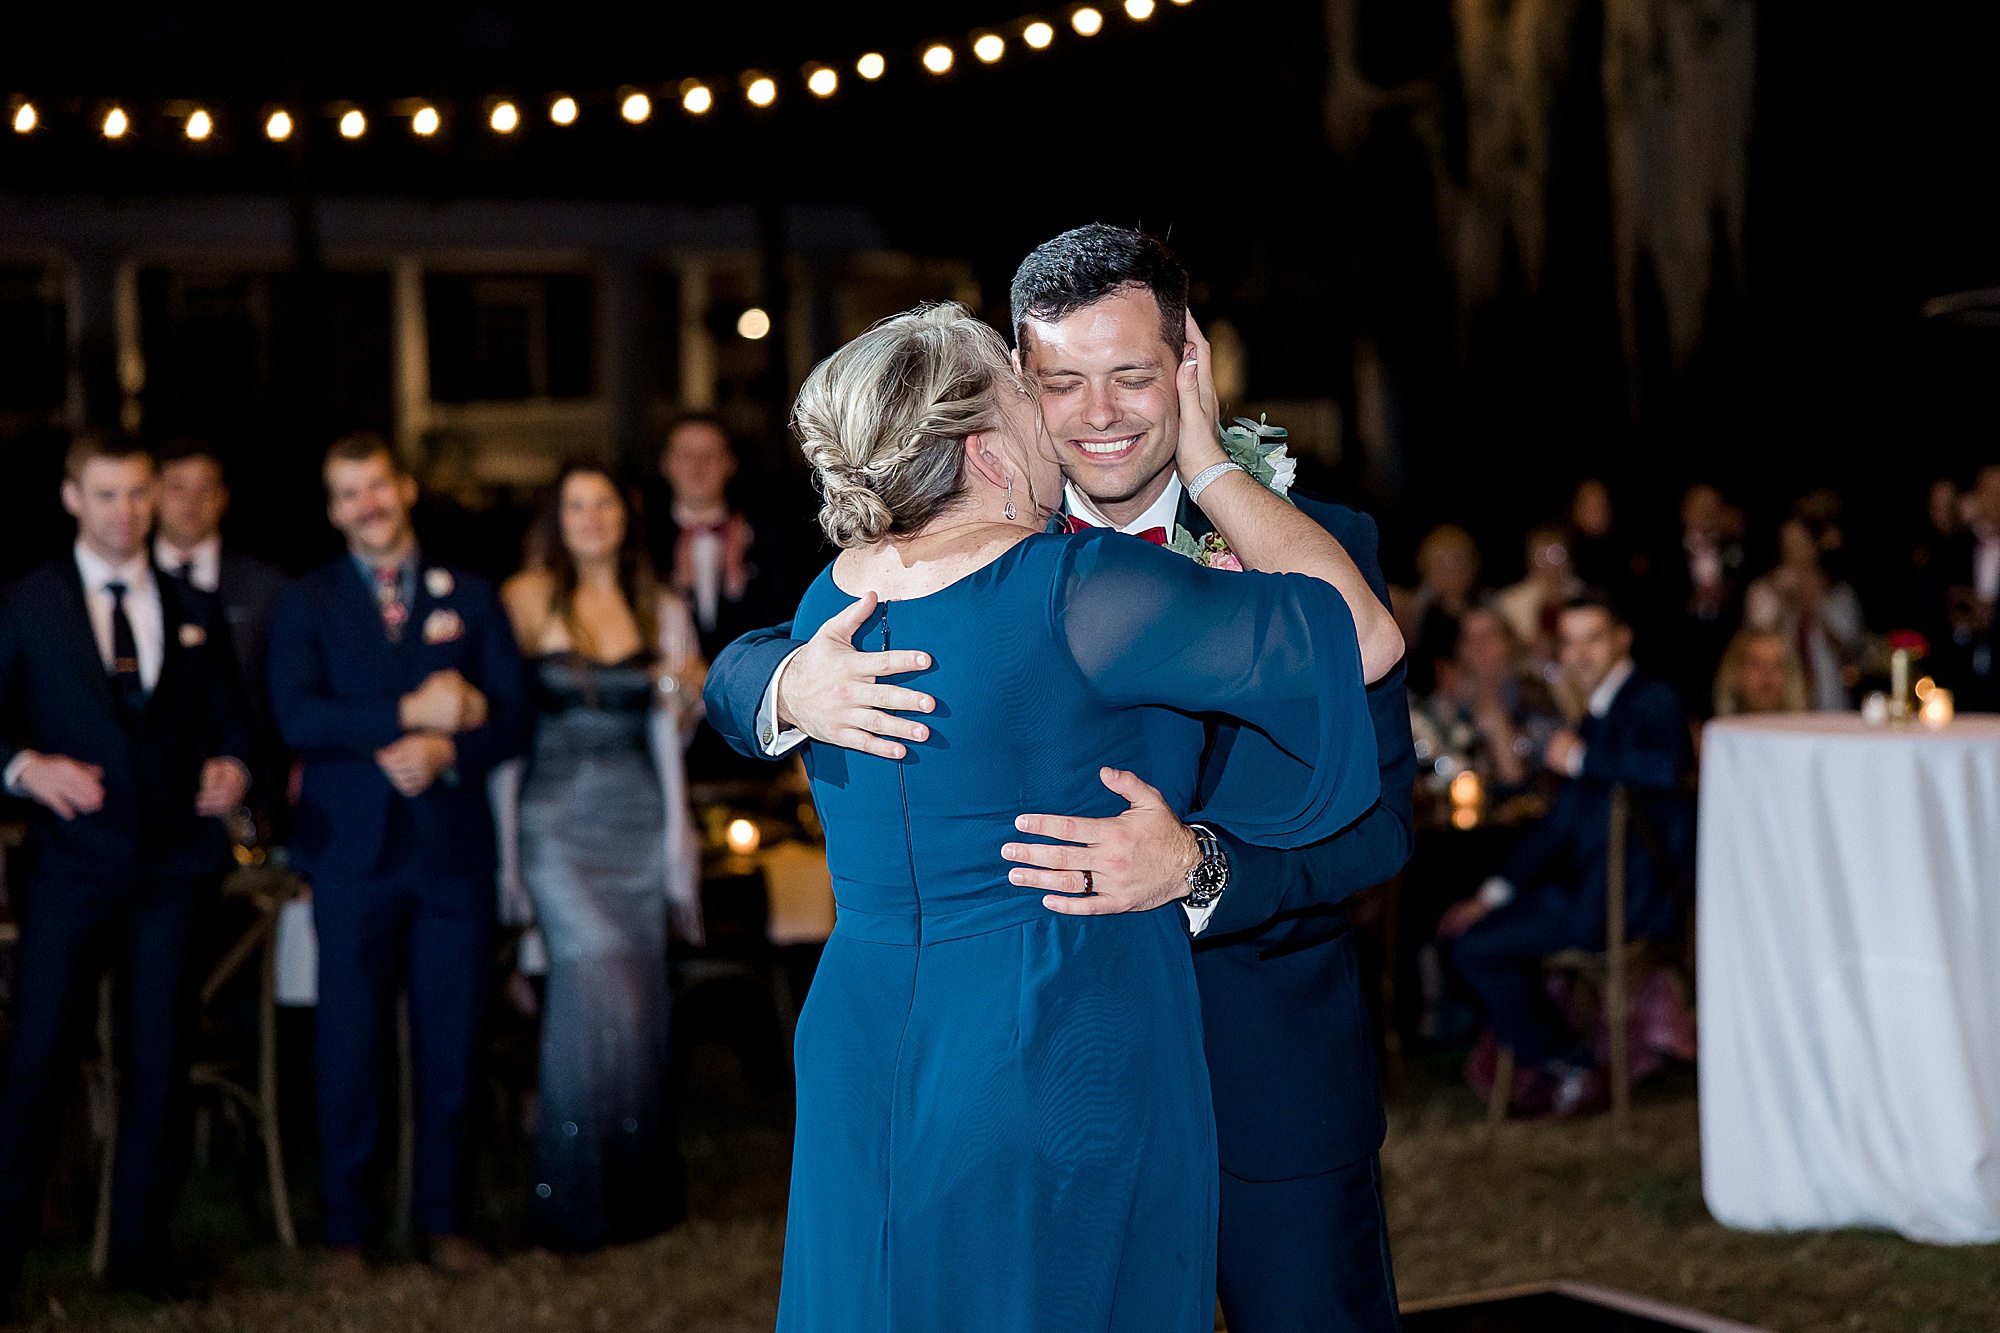 mother-son dance at Magnolia Plantation and Gardens Wedding